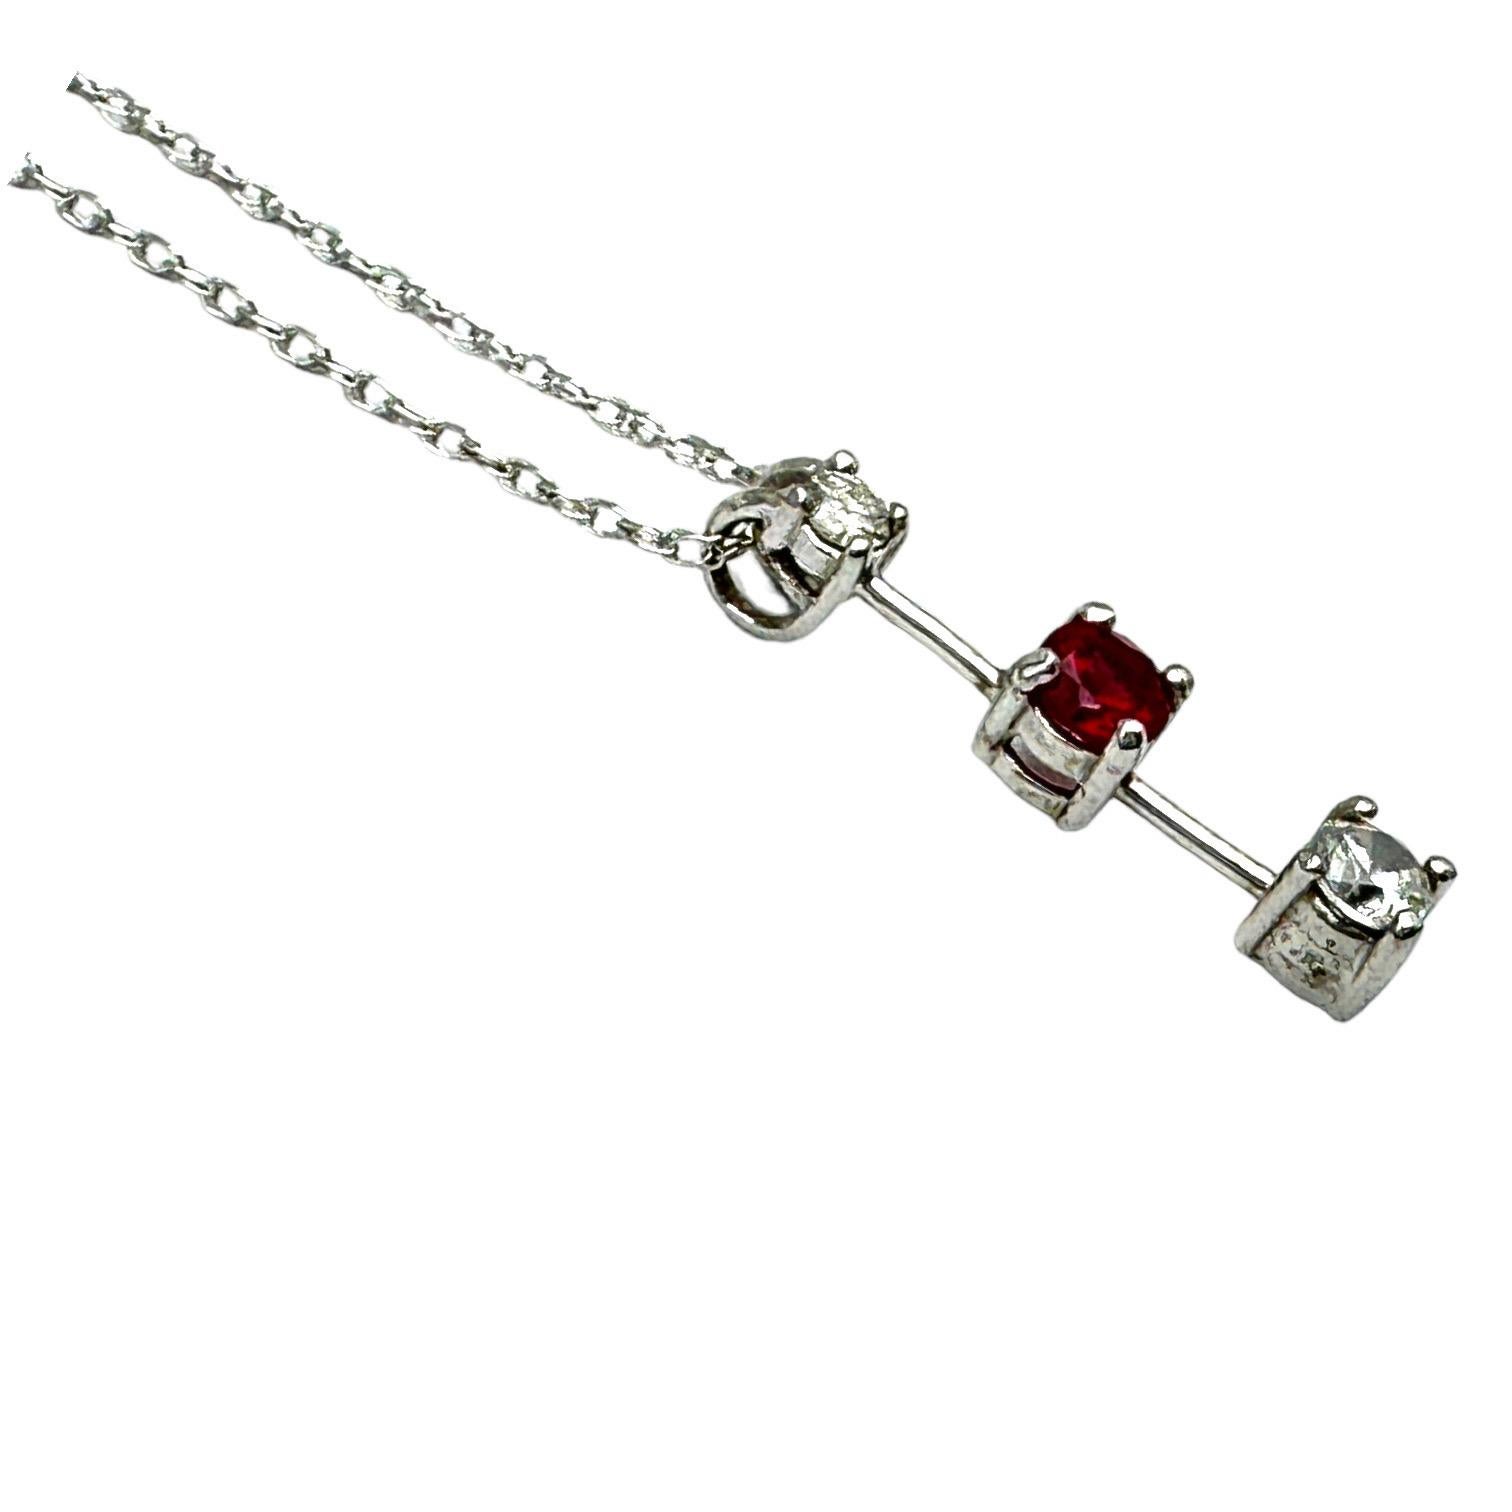 This beautiful pendant features three genuine stones: a .53 carat ruby and two diamonds. Crafted in 14 karat white gold, this stunning pendant is a classic representation of beauty and style. Perfect for any occasion, this pendant is sure to make a